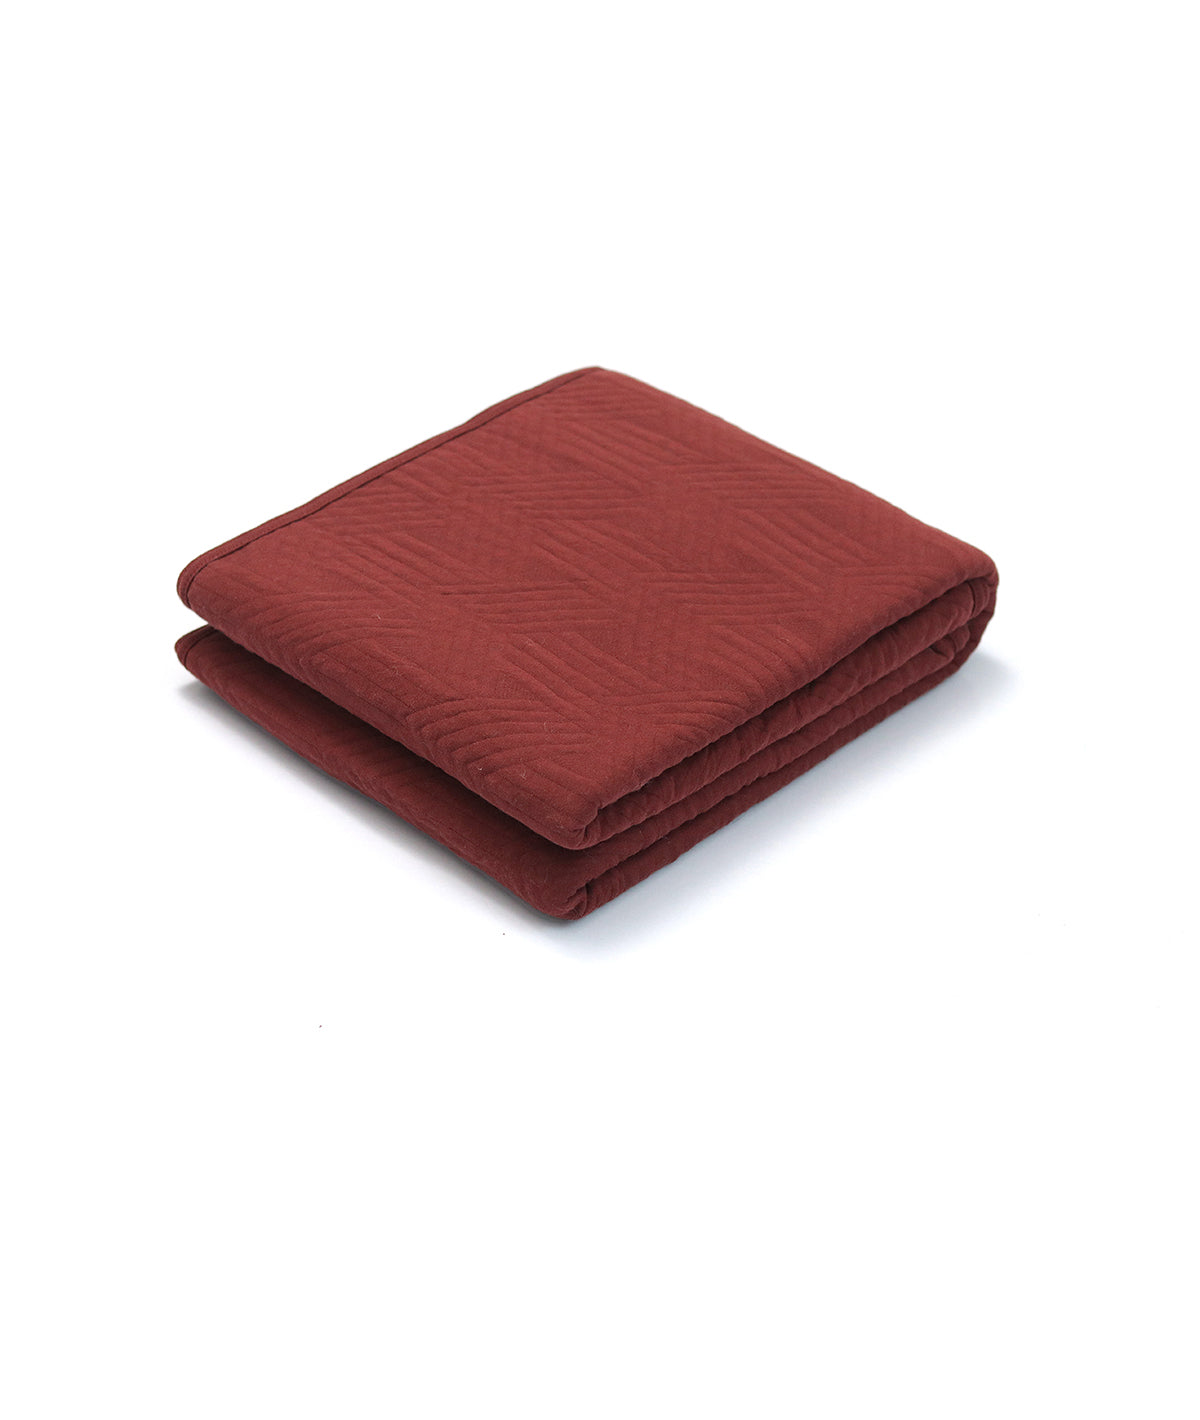 Parquet Texture Maroon Cotton Knitted Light weight Quilted Blanket